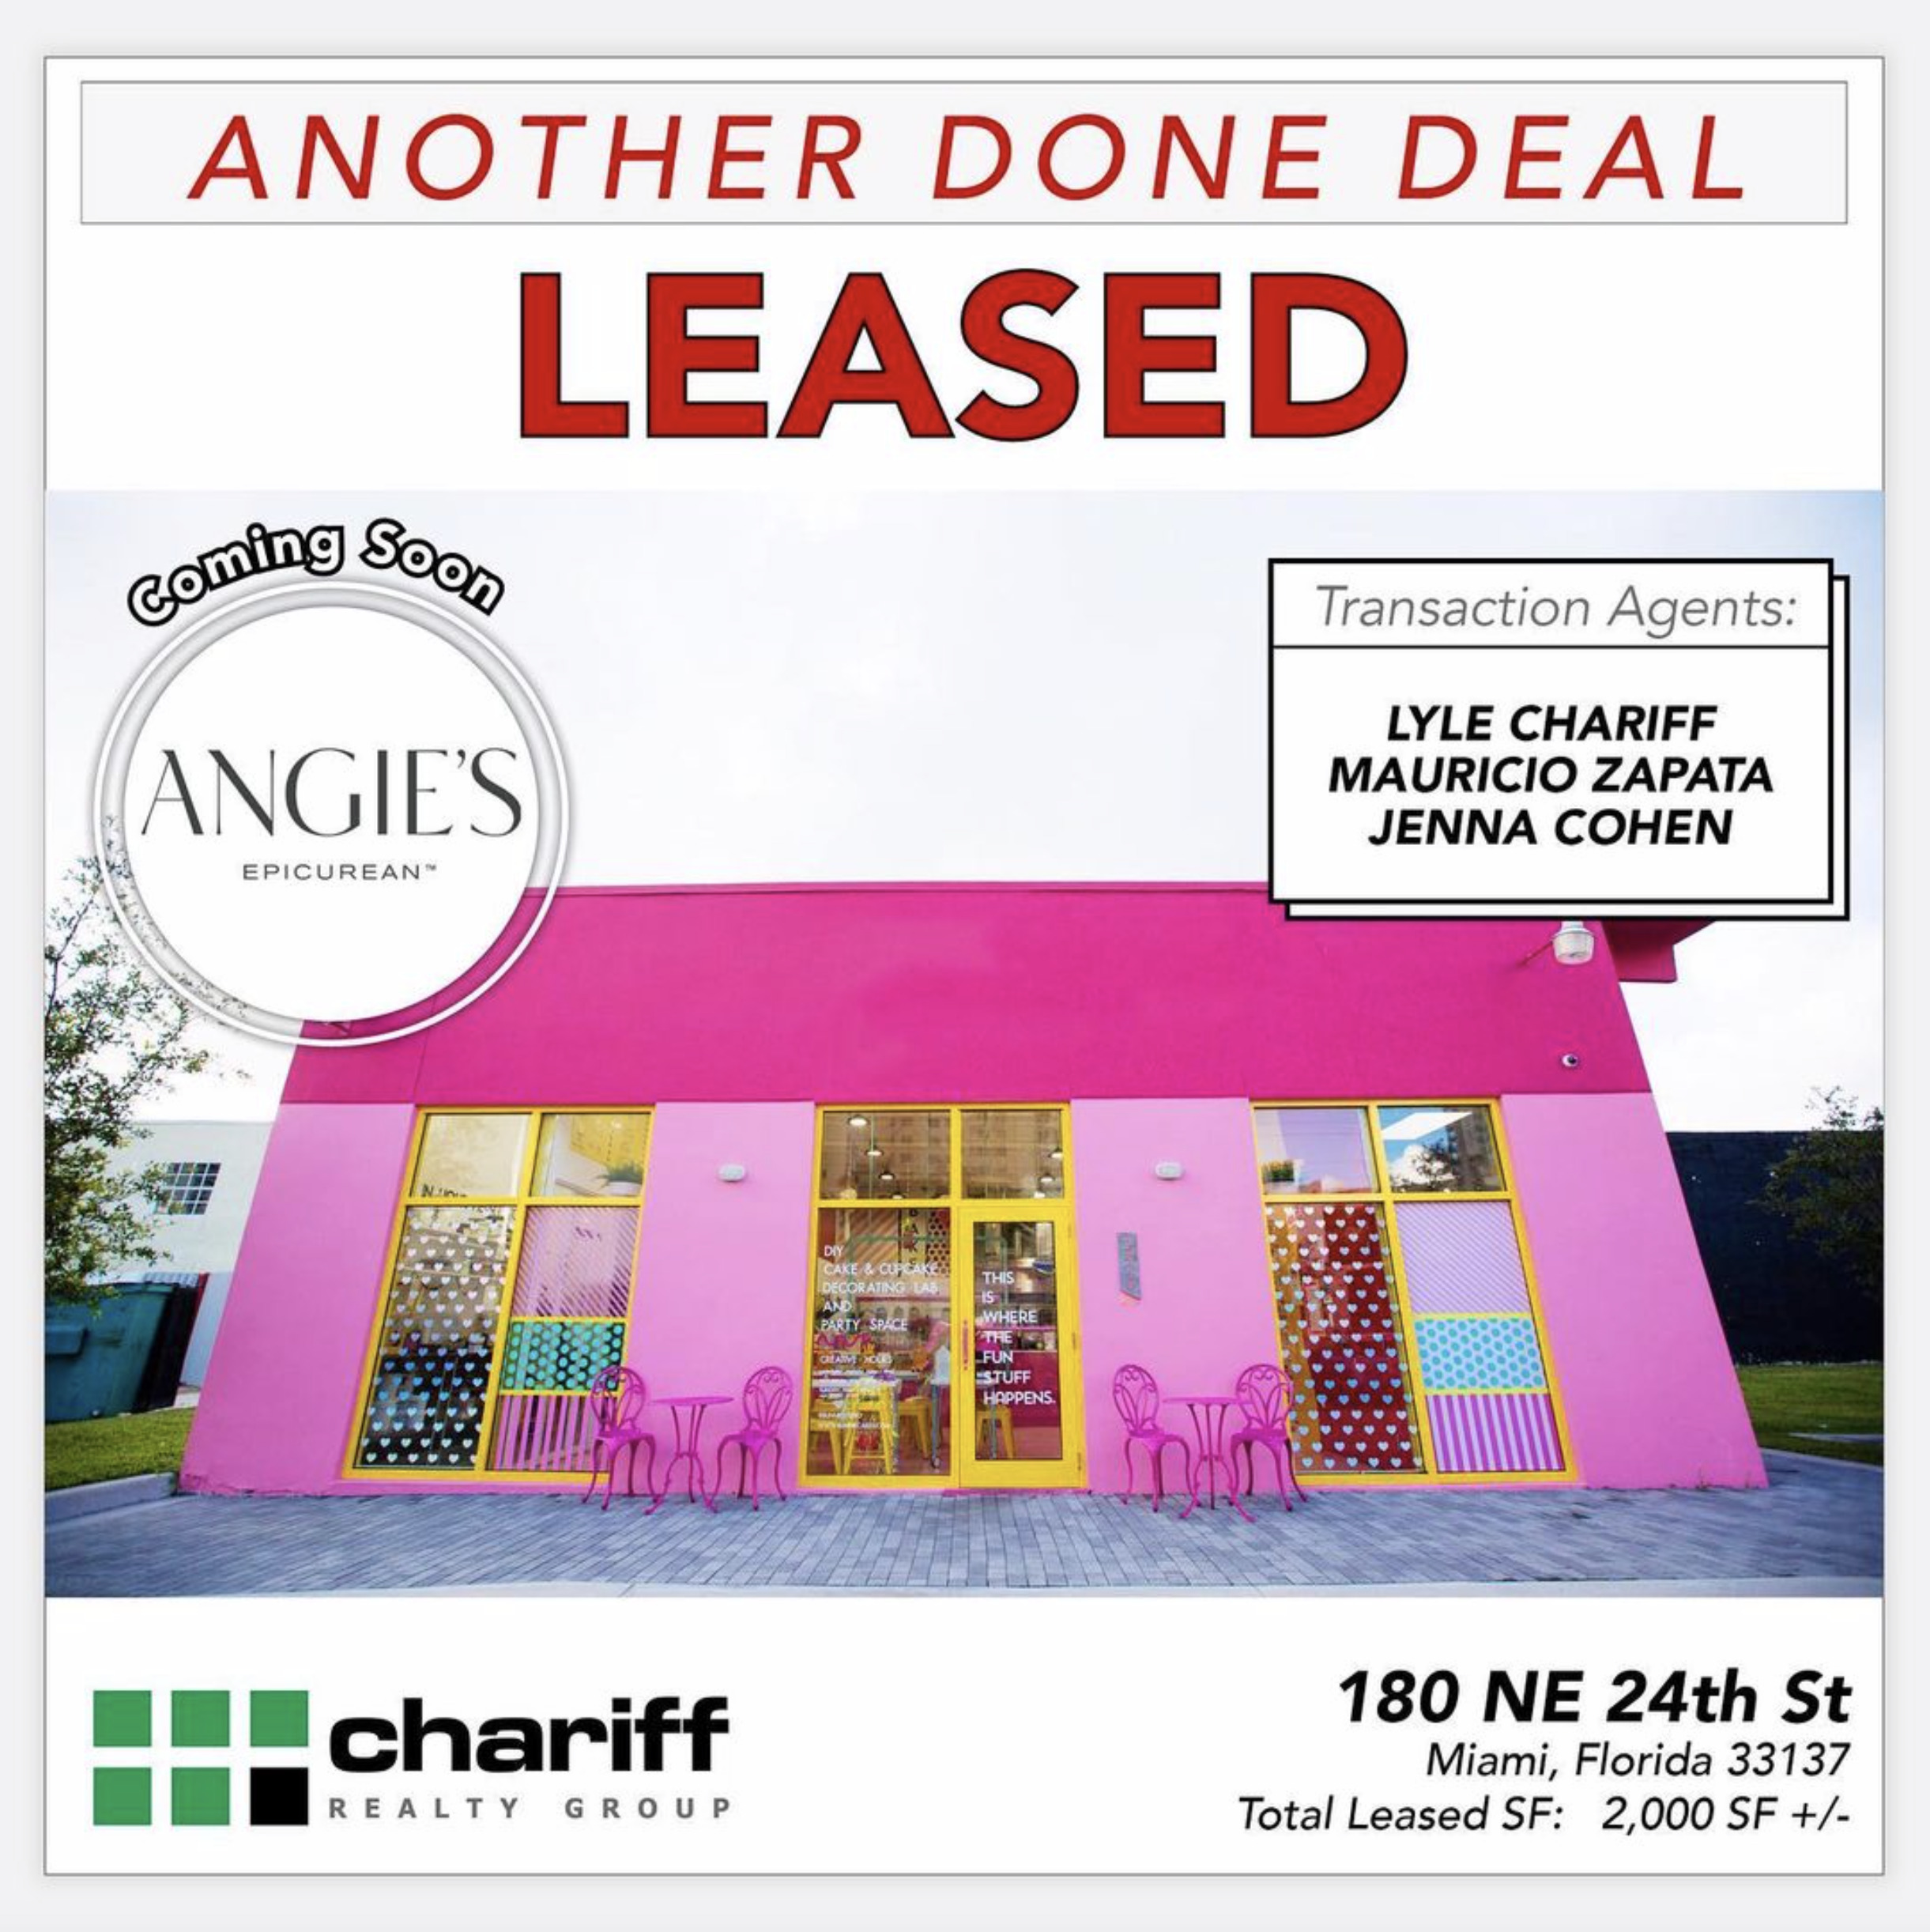 180 NE 24th St - Another Done Deal - Leased - Edgewater - Miami-Florida-33137-Chariff Realty Group